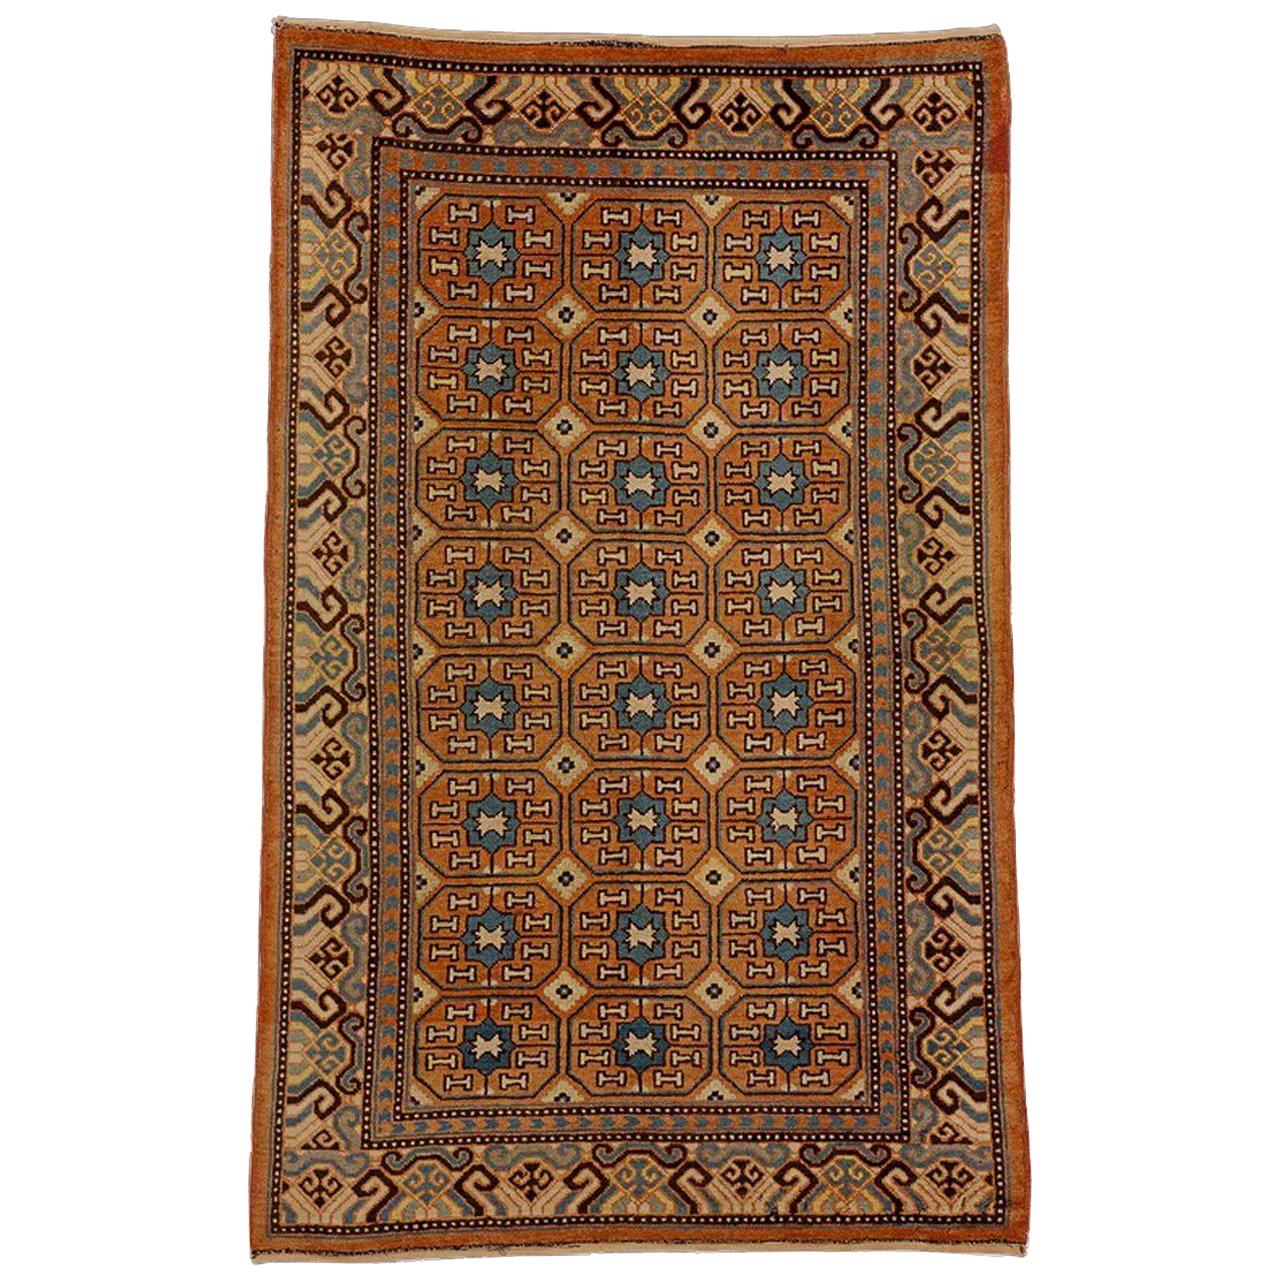 19th Century Brown and Blue Stylized Rosette Gul Chinese Khotan Rug, circa 1870s